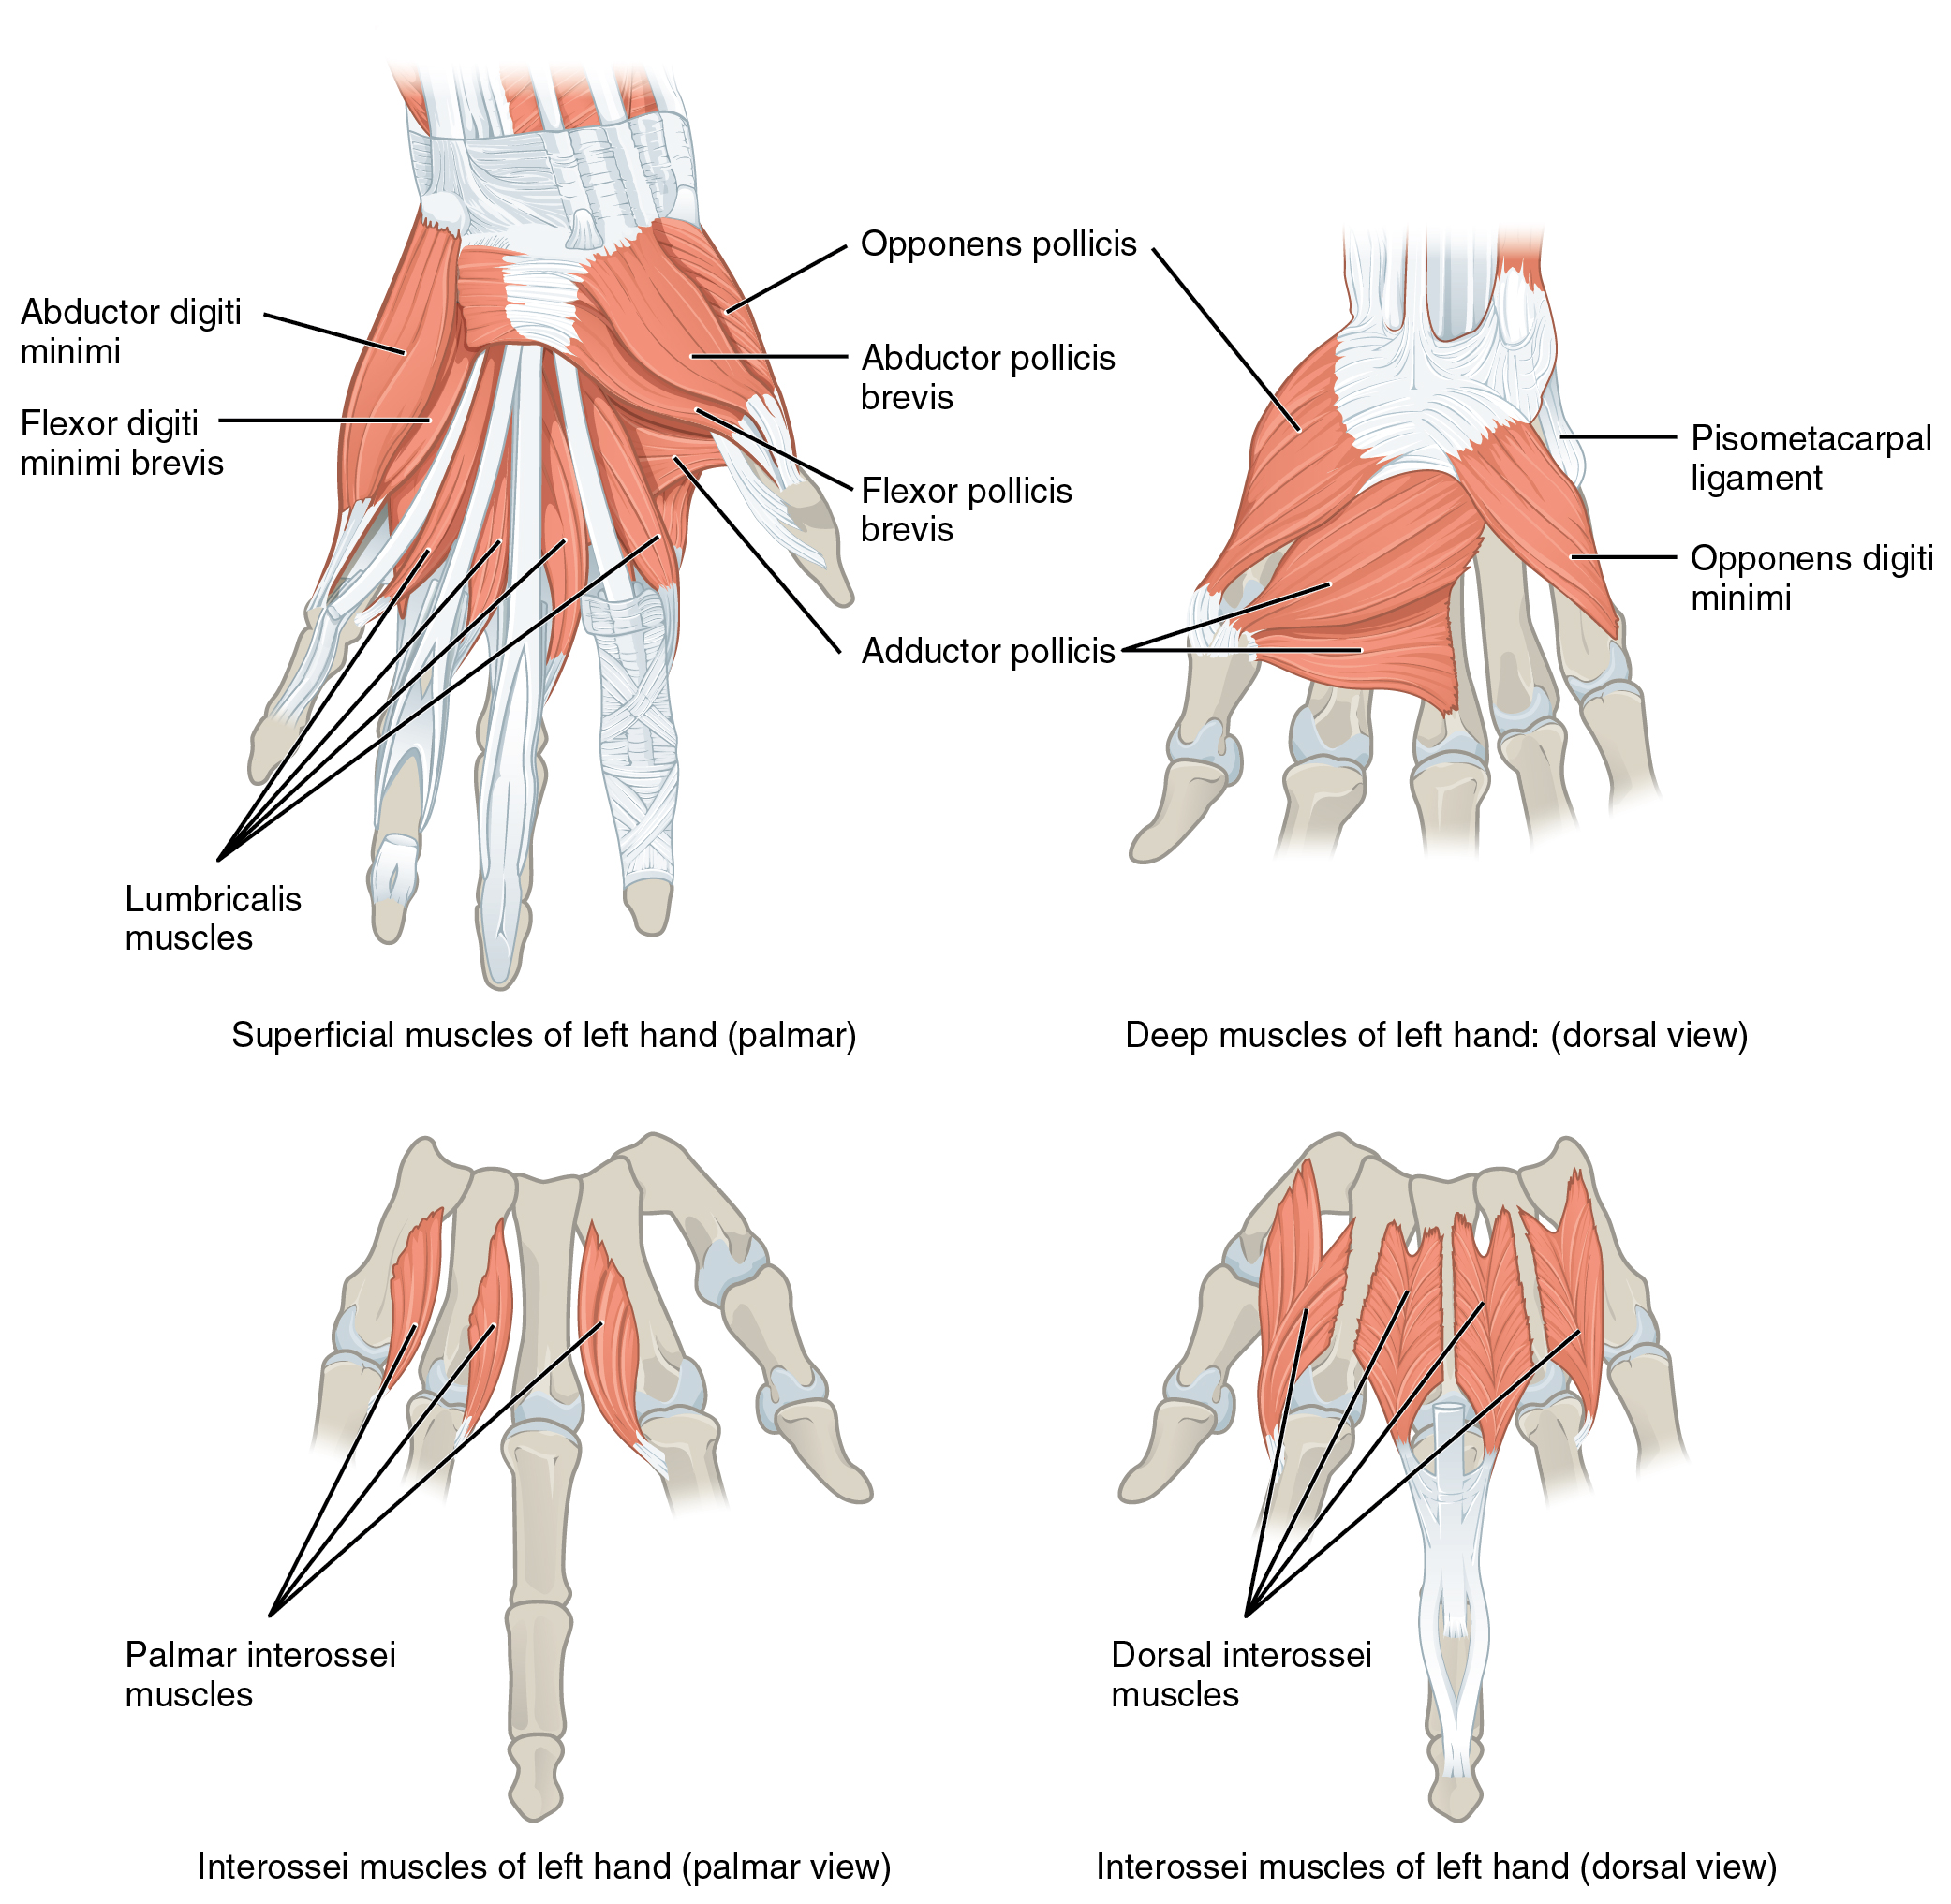 palmar view of superficial muscles of the left hand; dorsal view of the deep muscles of the left hand; palmar and dorsal views of the interossei muscles of the left hand